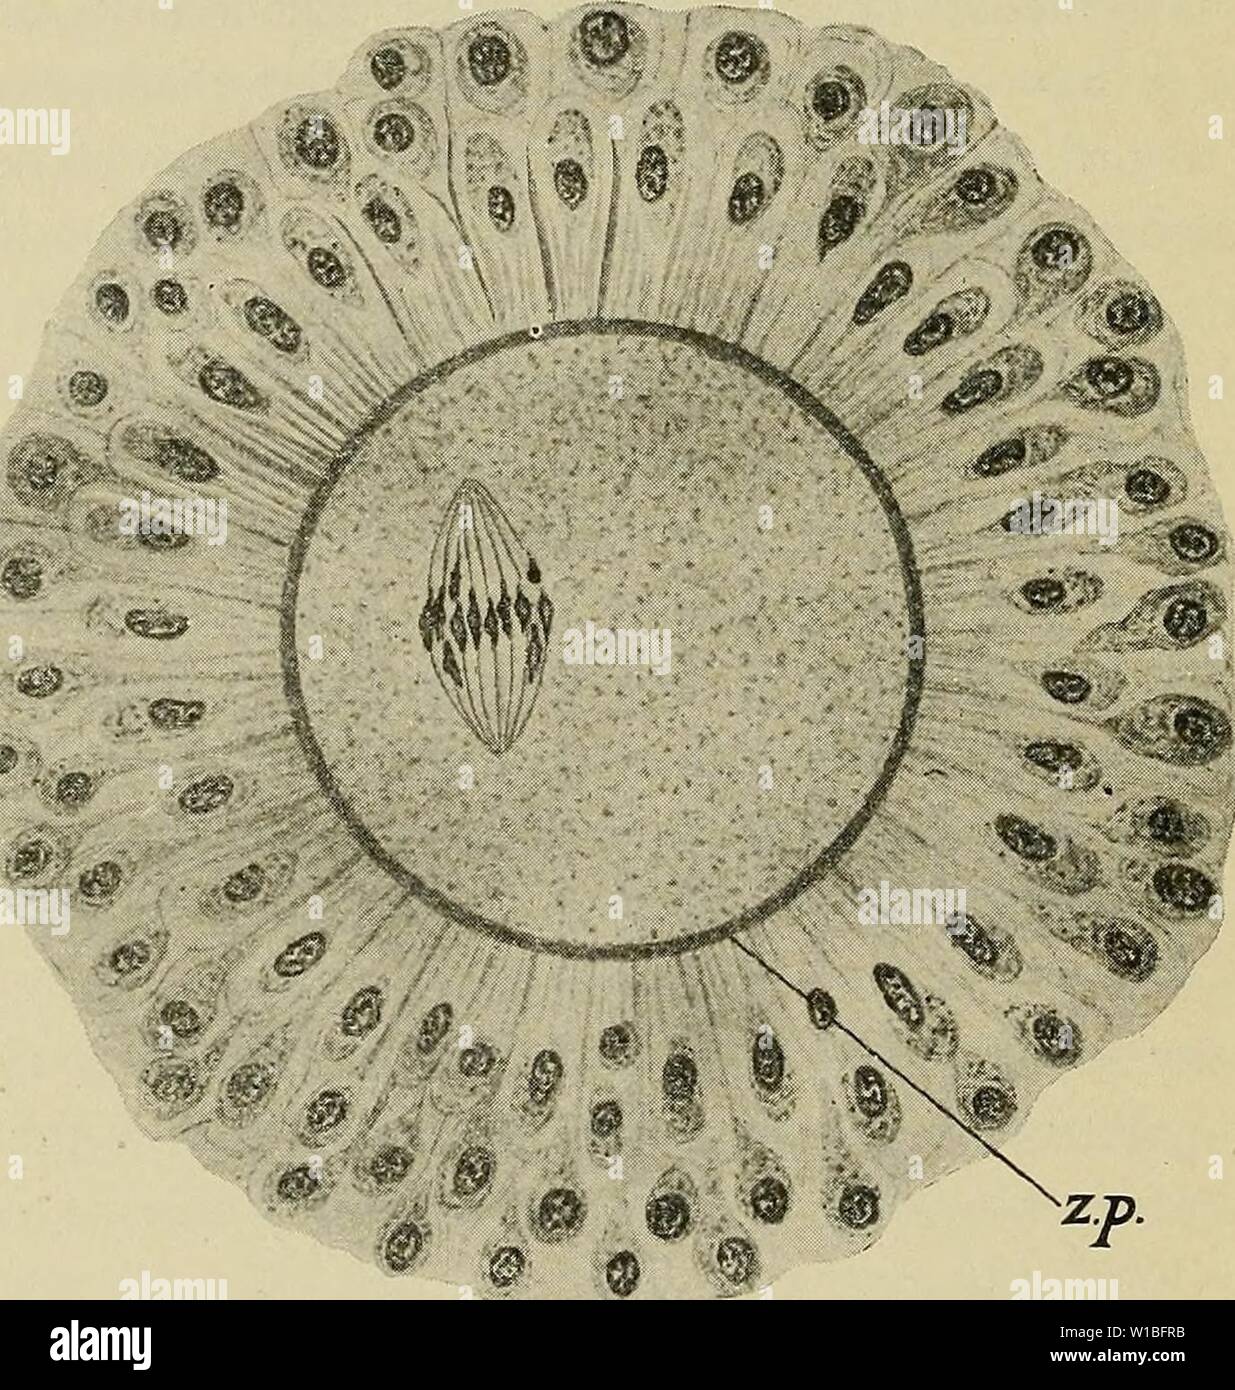 Archive image from page 39 of The development of the human. The development of the human body : a manual of human embryology . developmentofhum00mcmu Year: 1914  28 THE MATURATION OF THE OVUM although female monkeys menstruate regularly throughout the year, nevertheless there is but one annual cestral period when ovulation takes place (Heape). The Maturation of the Ovum.—Returning now to the ovum, it has been shown that at the time of its extrusion from the Graafian follicle it is not equivalent to a spermatozoon but to a primary spermatocyte, and it may be remembered that such a spermatocyte Stock Photo